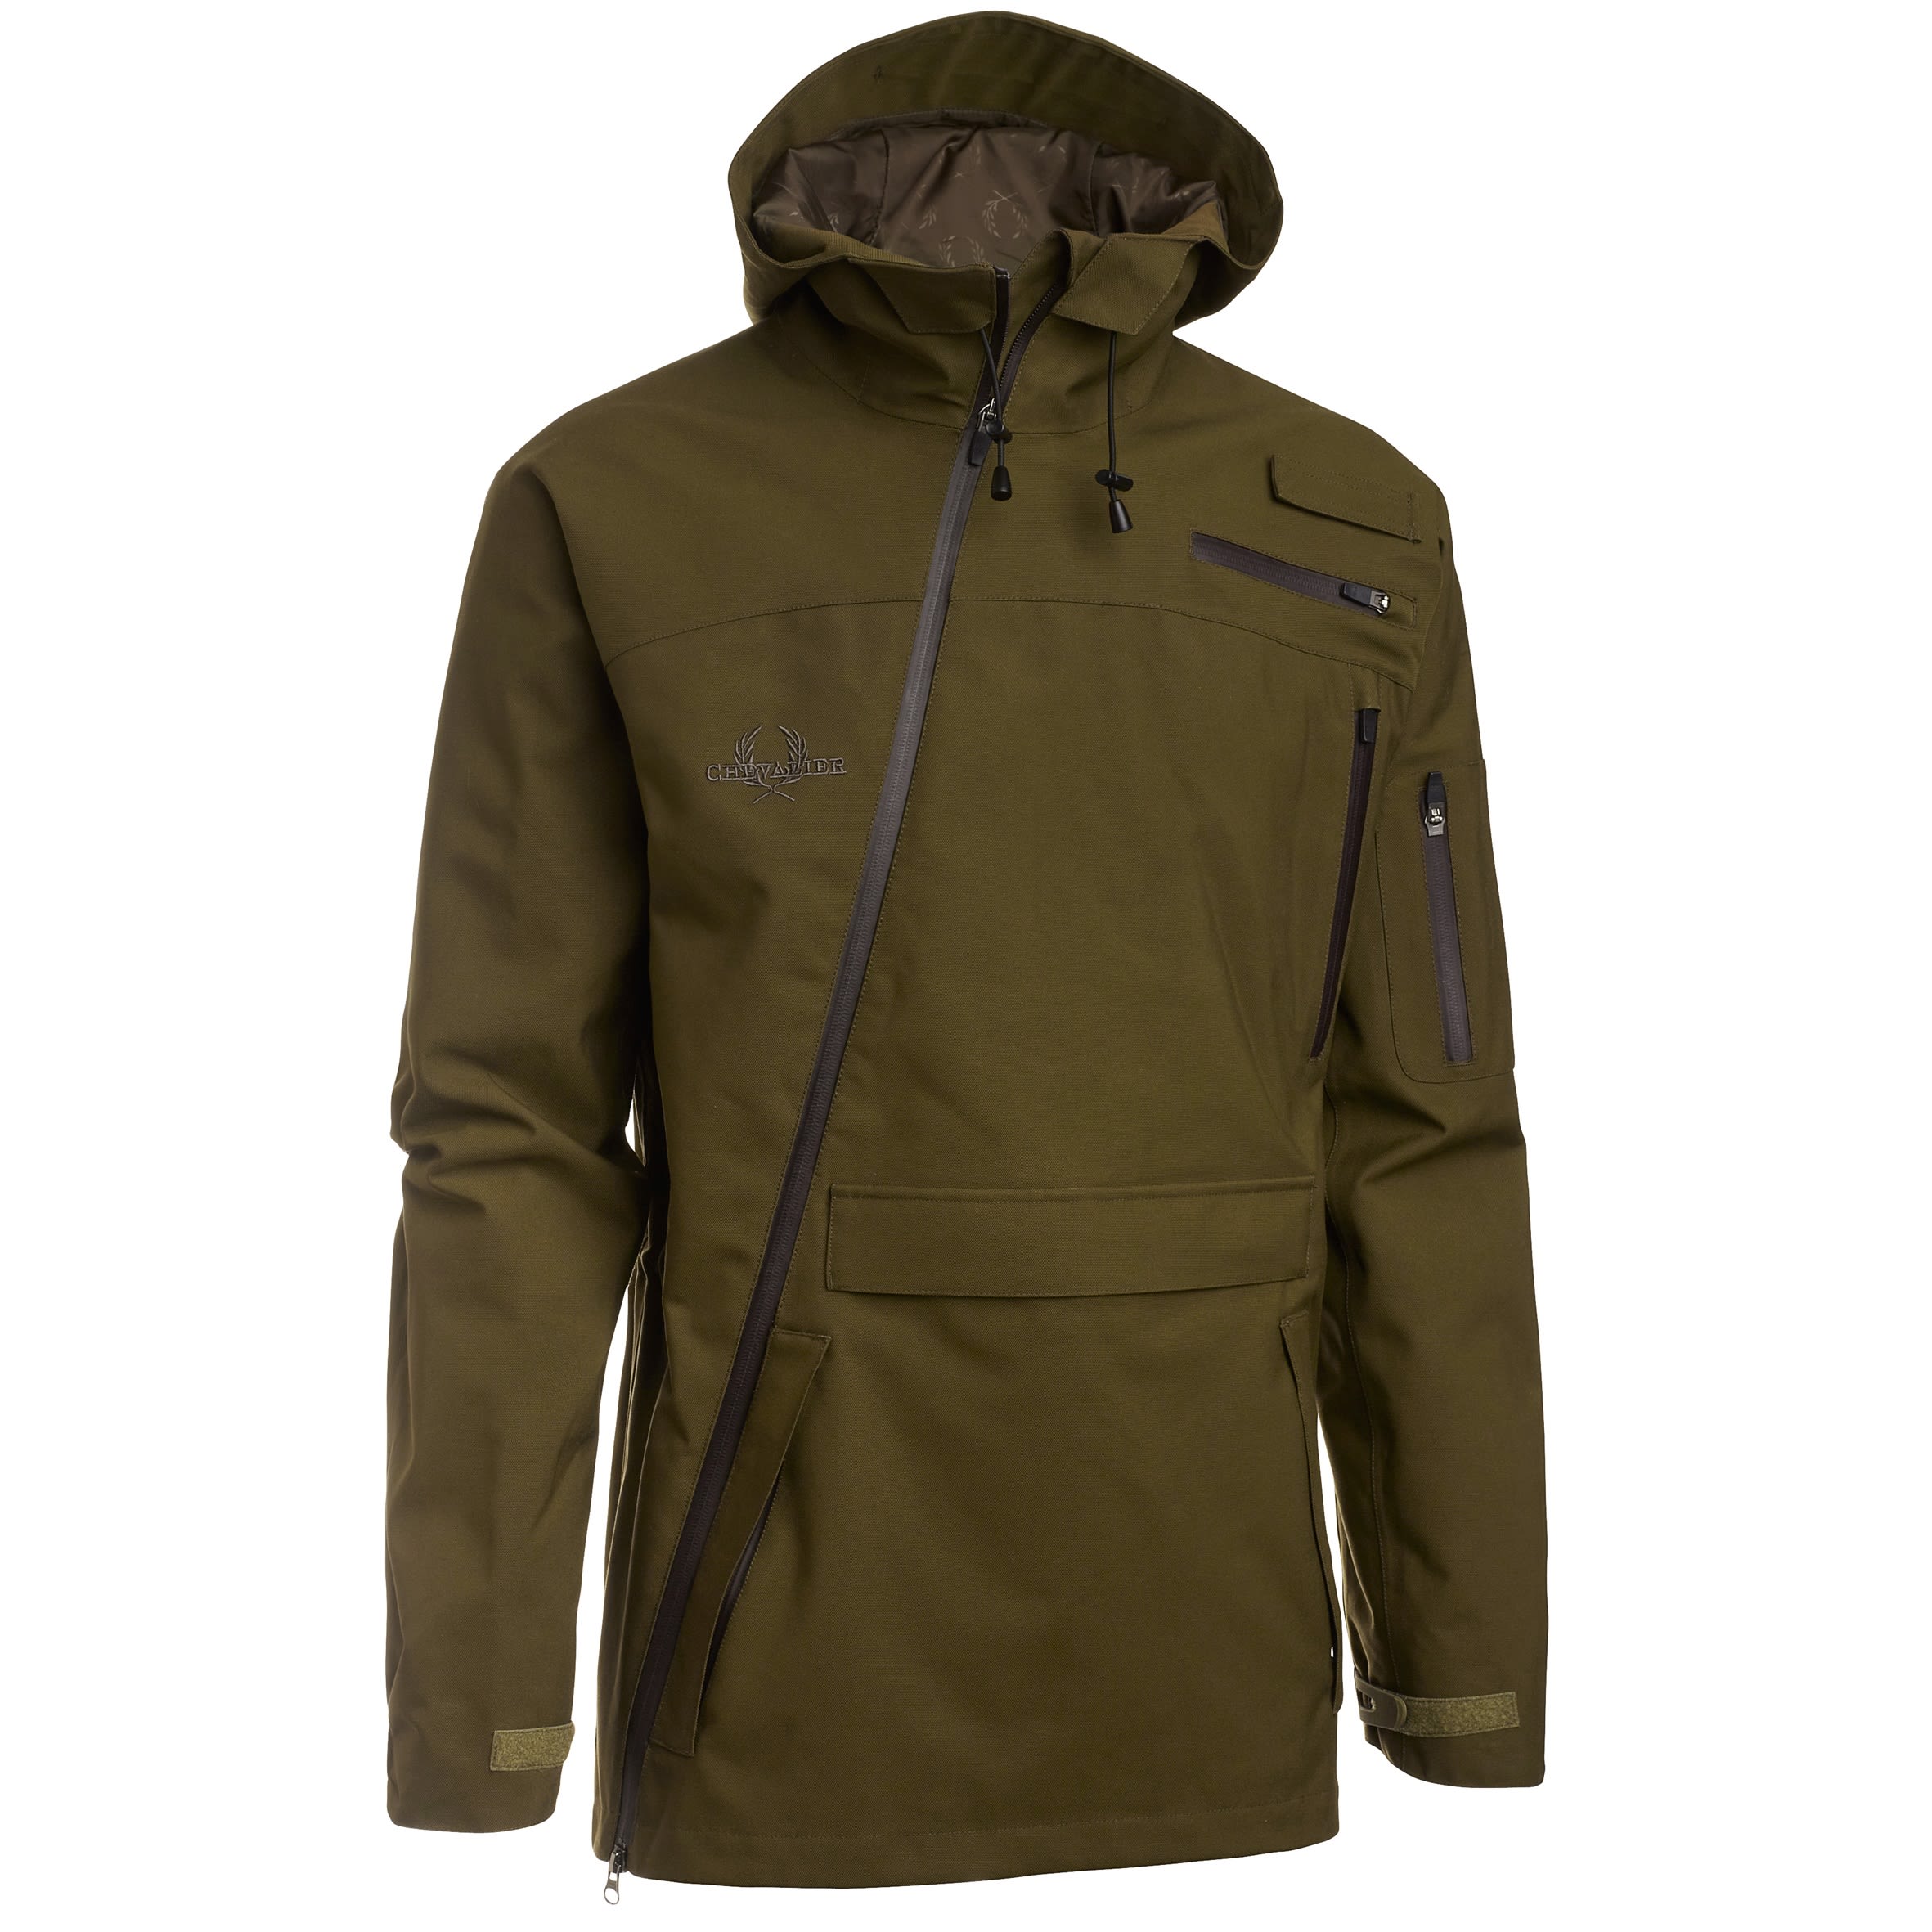 Buy Chevalier Venture Anorak from Outnorth